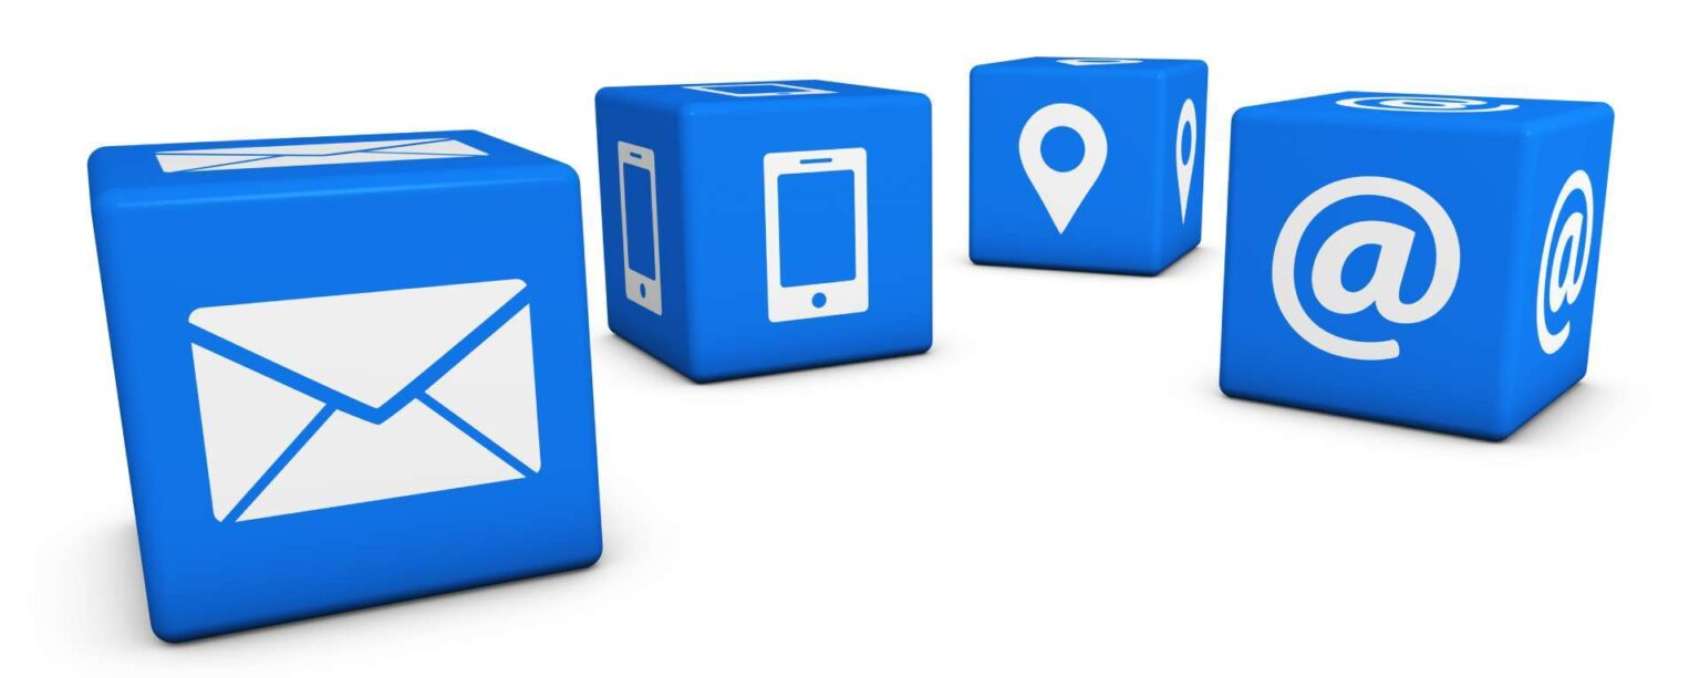 Contact Us Web Icon Cubes